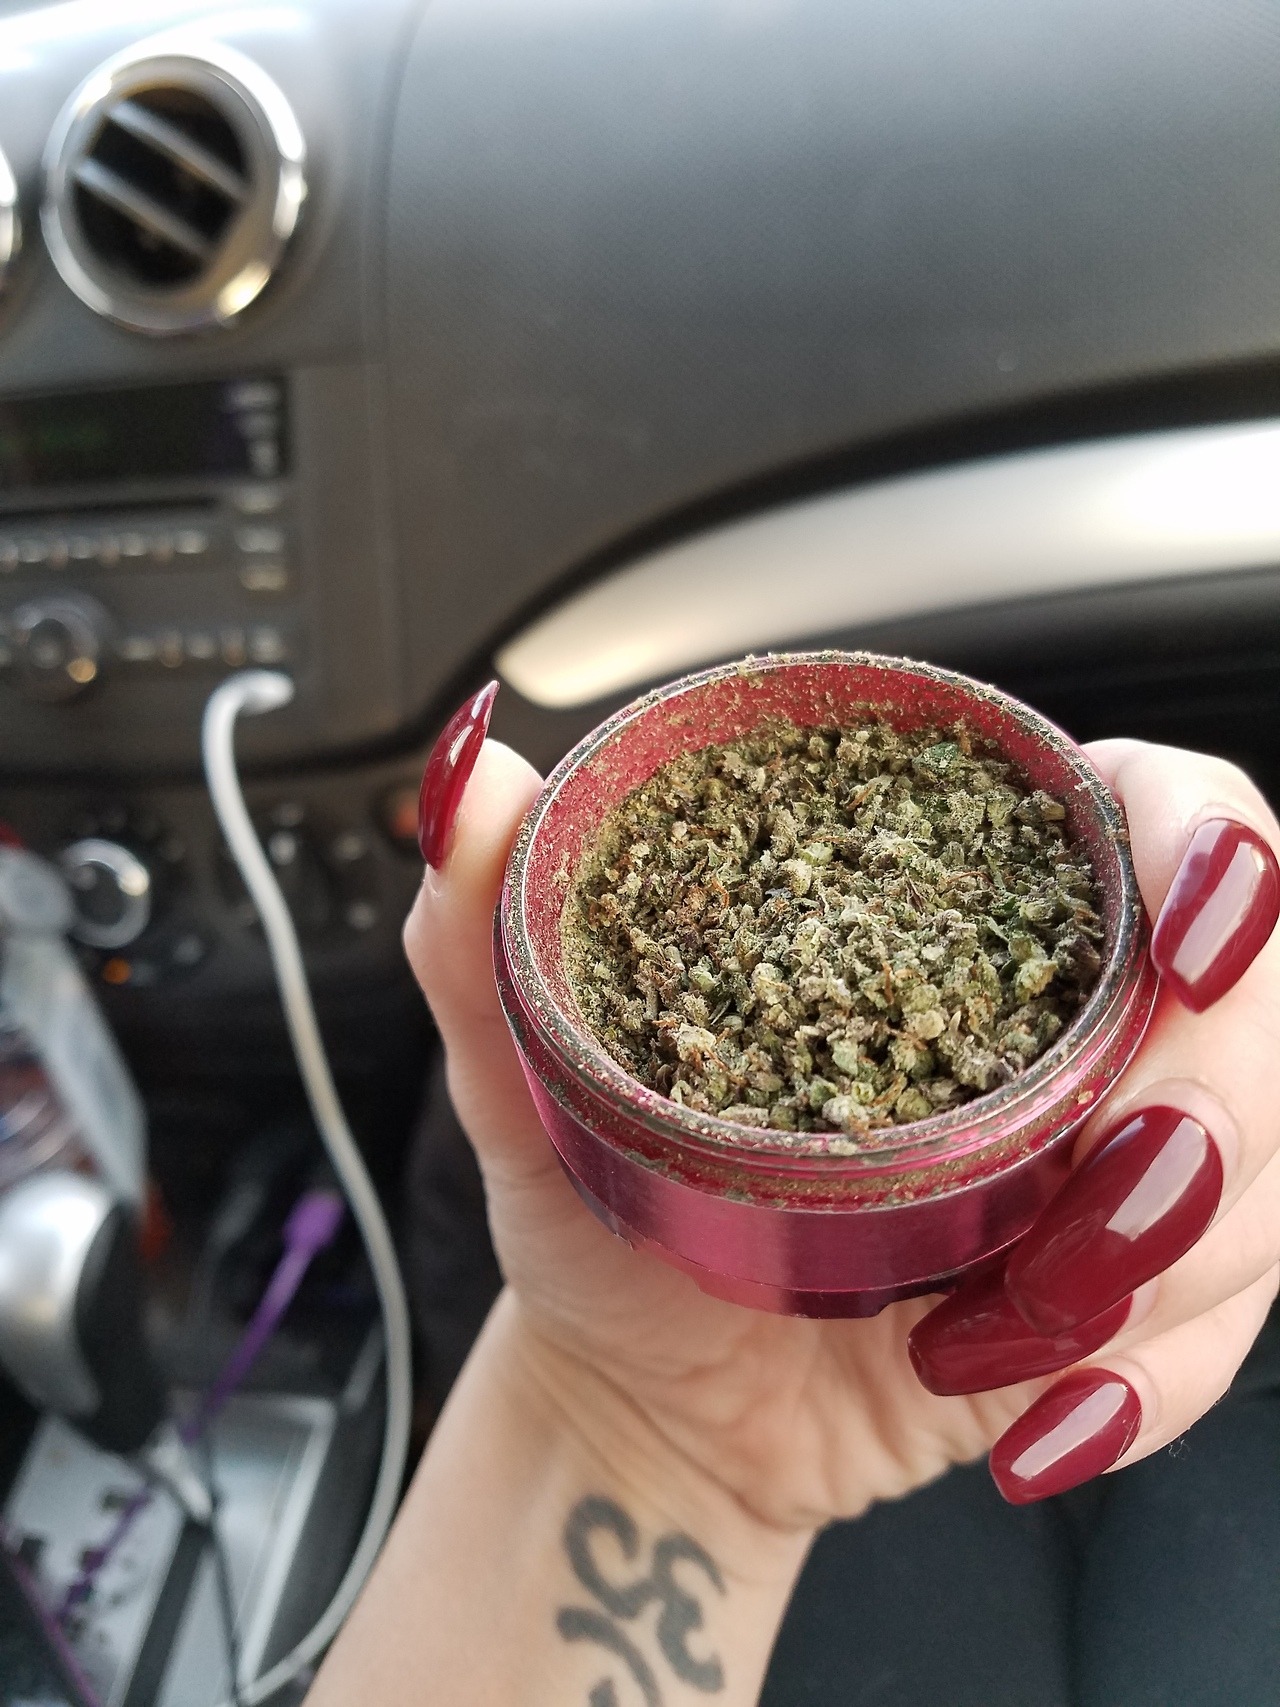 indica-illusions:  indica-illusions:  Ahh how I love grinding up bud and watching